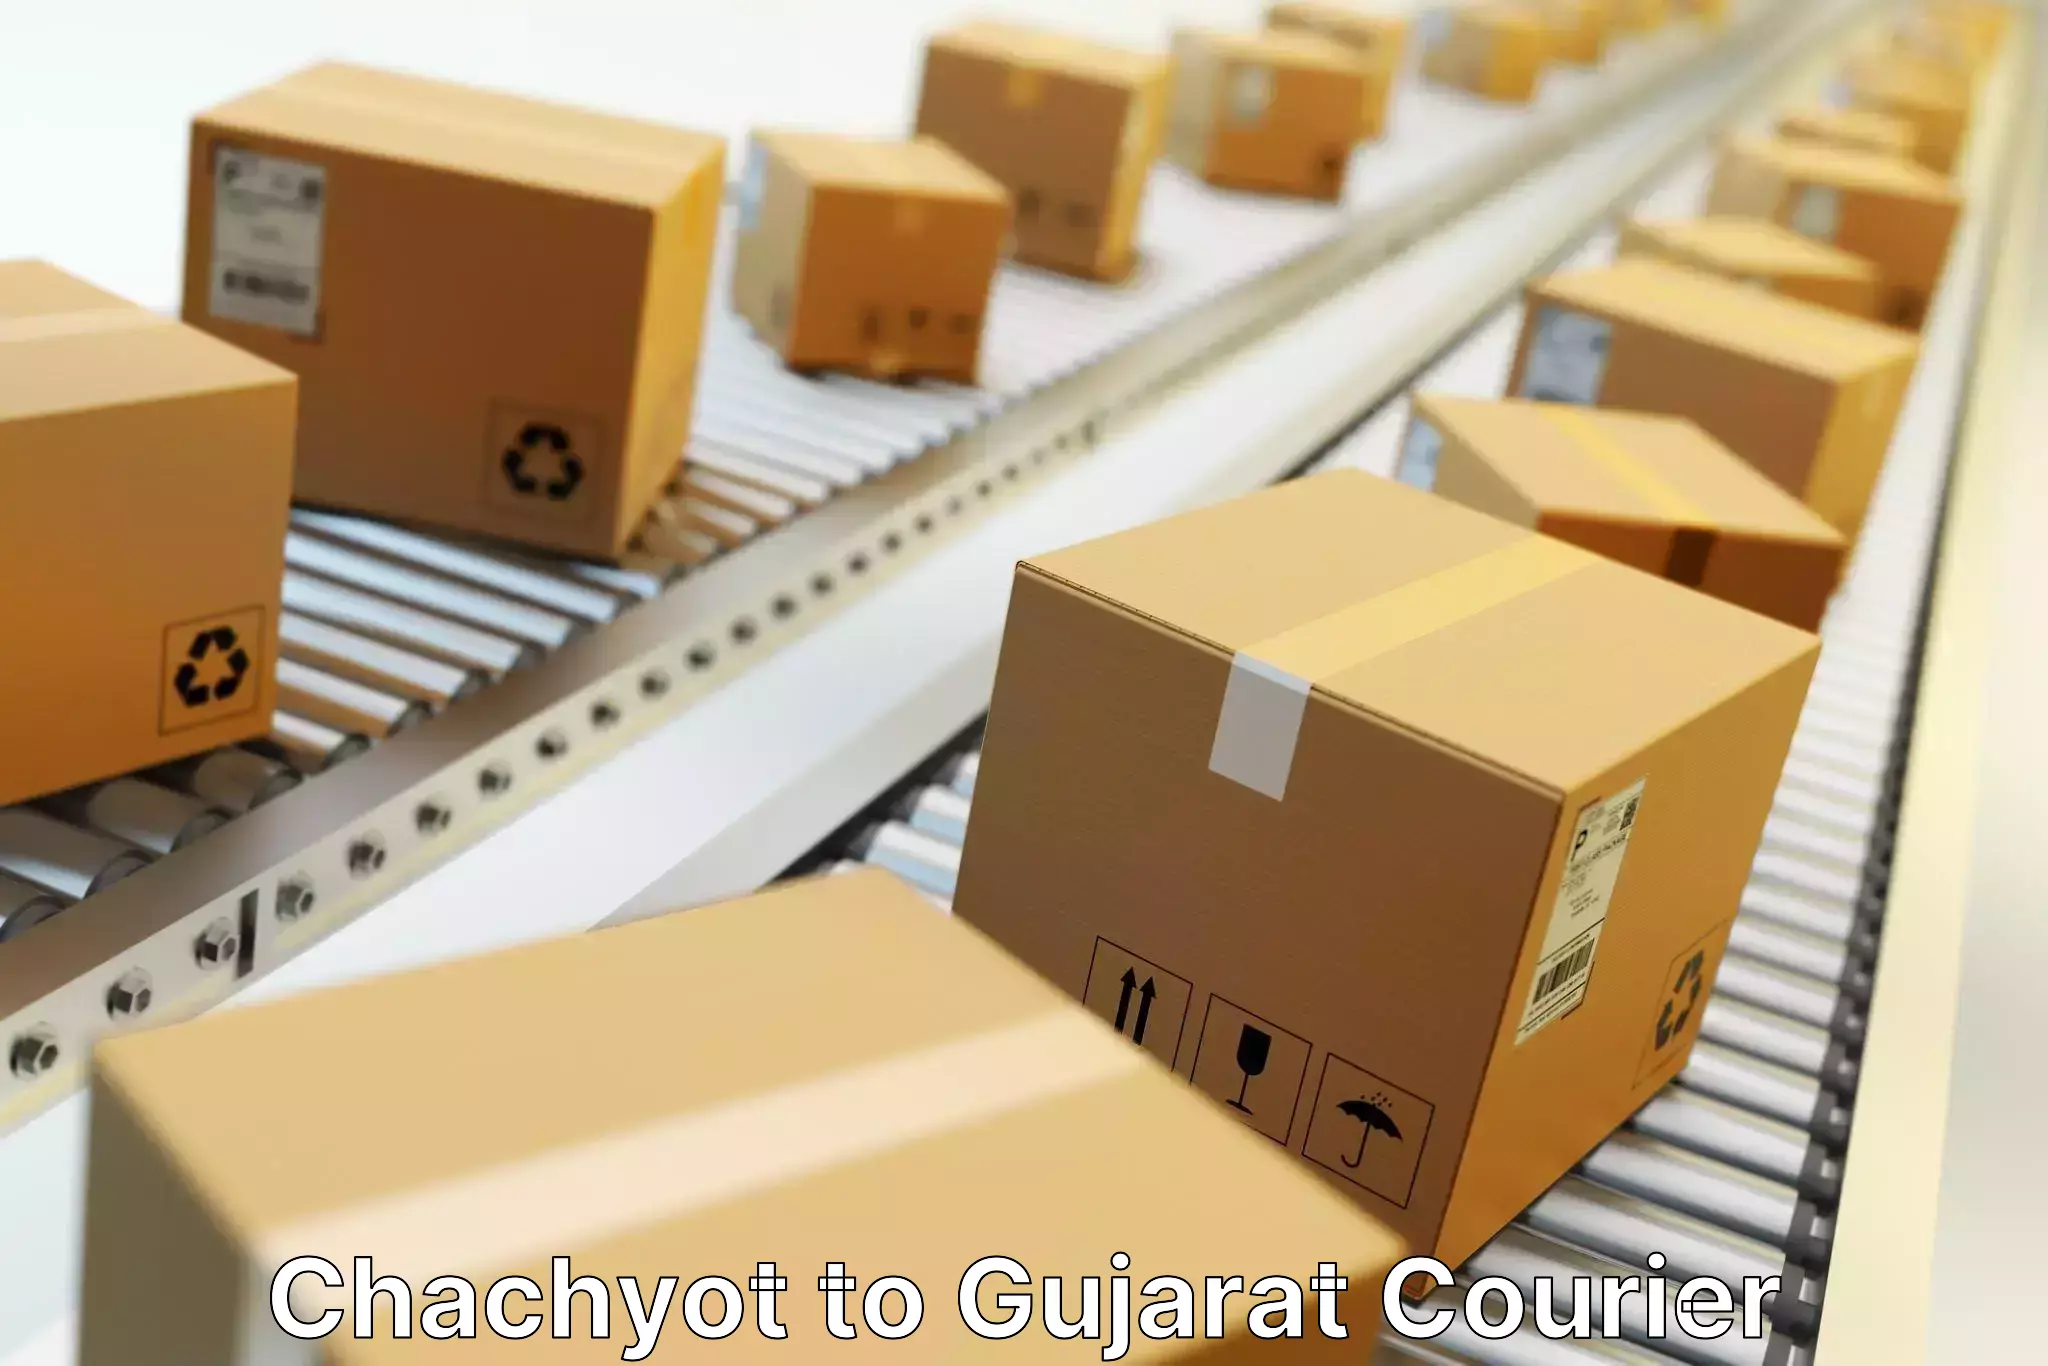 Nationwide parcel services Chachyot to Gujarat